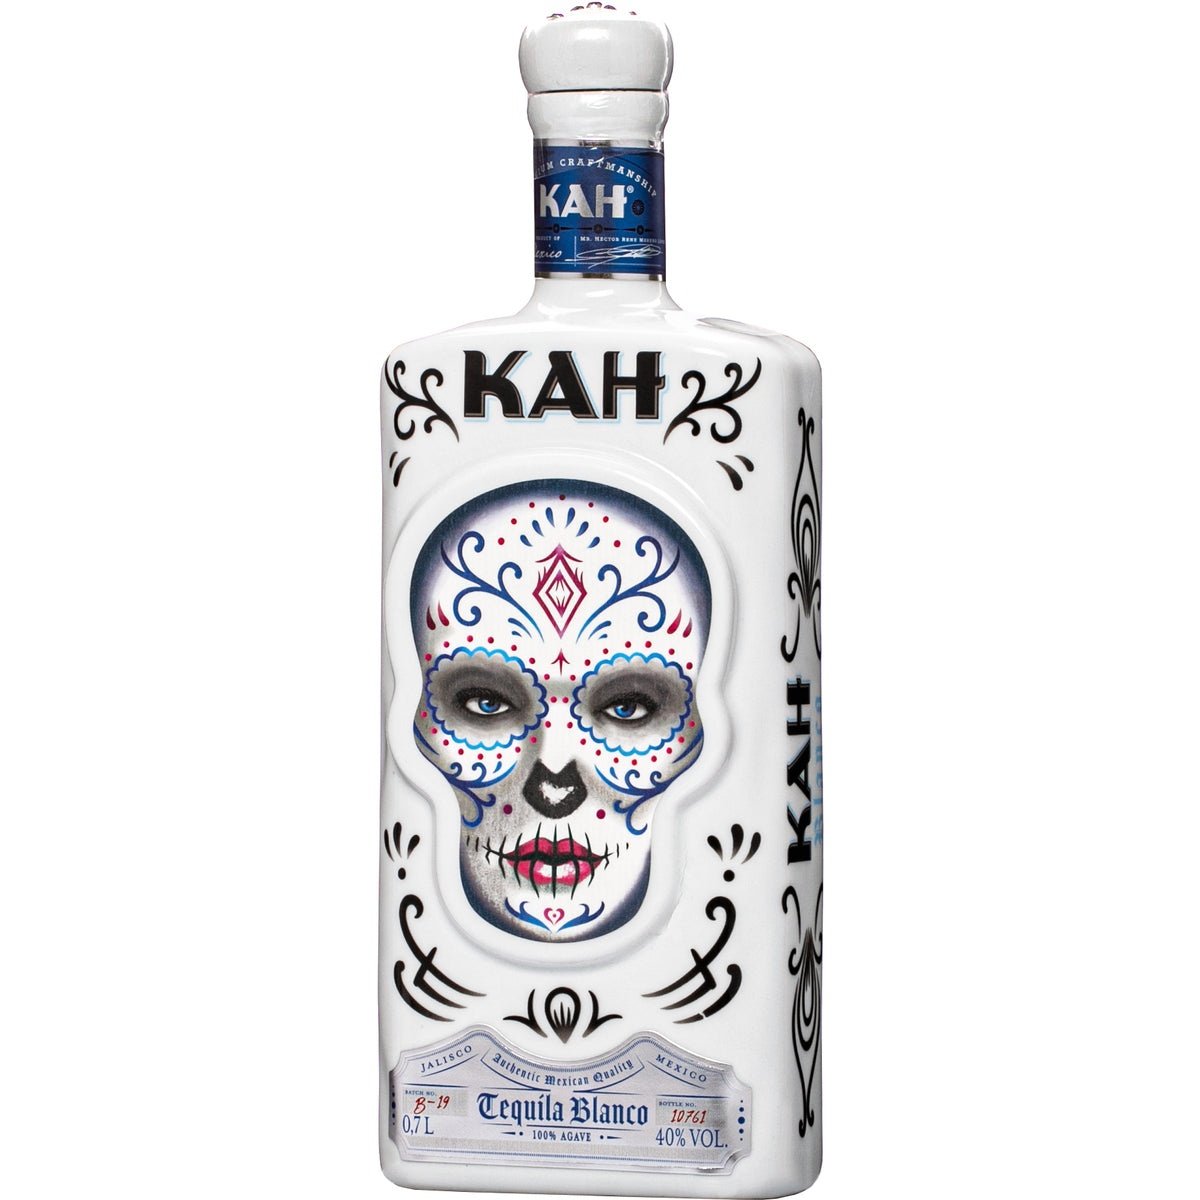 Kah - Day of the Dead Tequila - Blanco